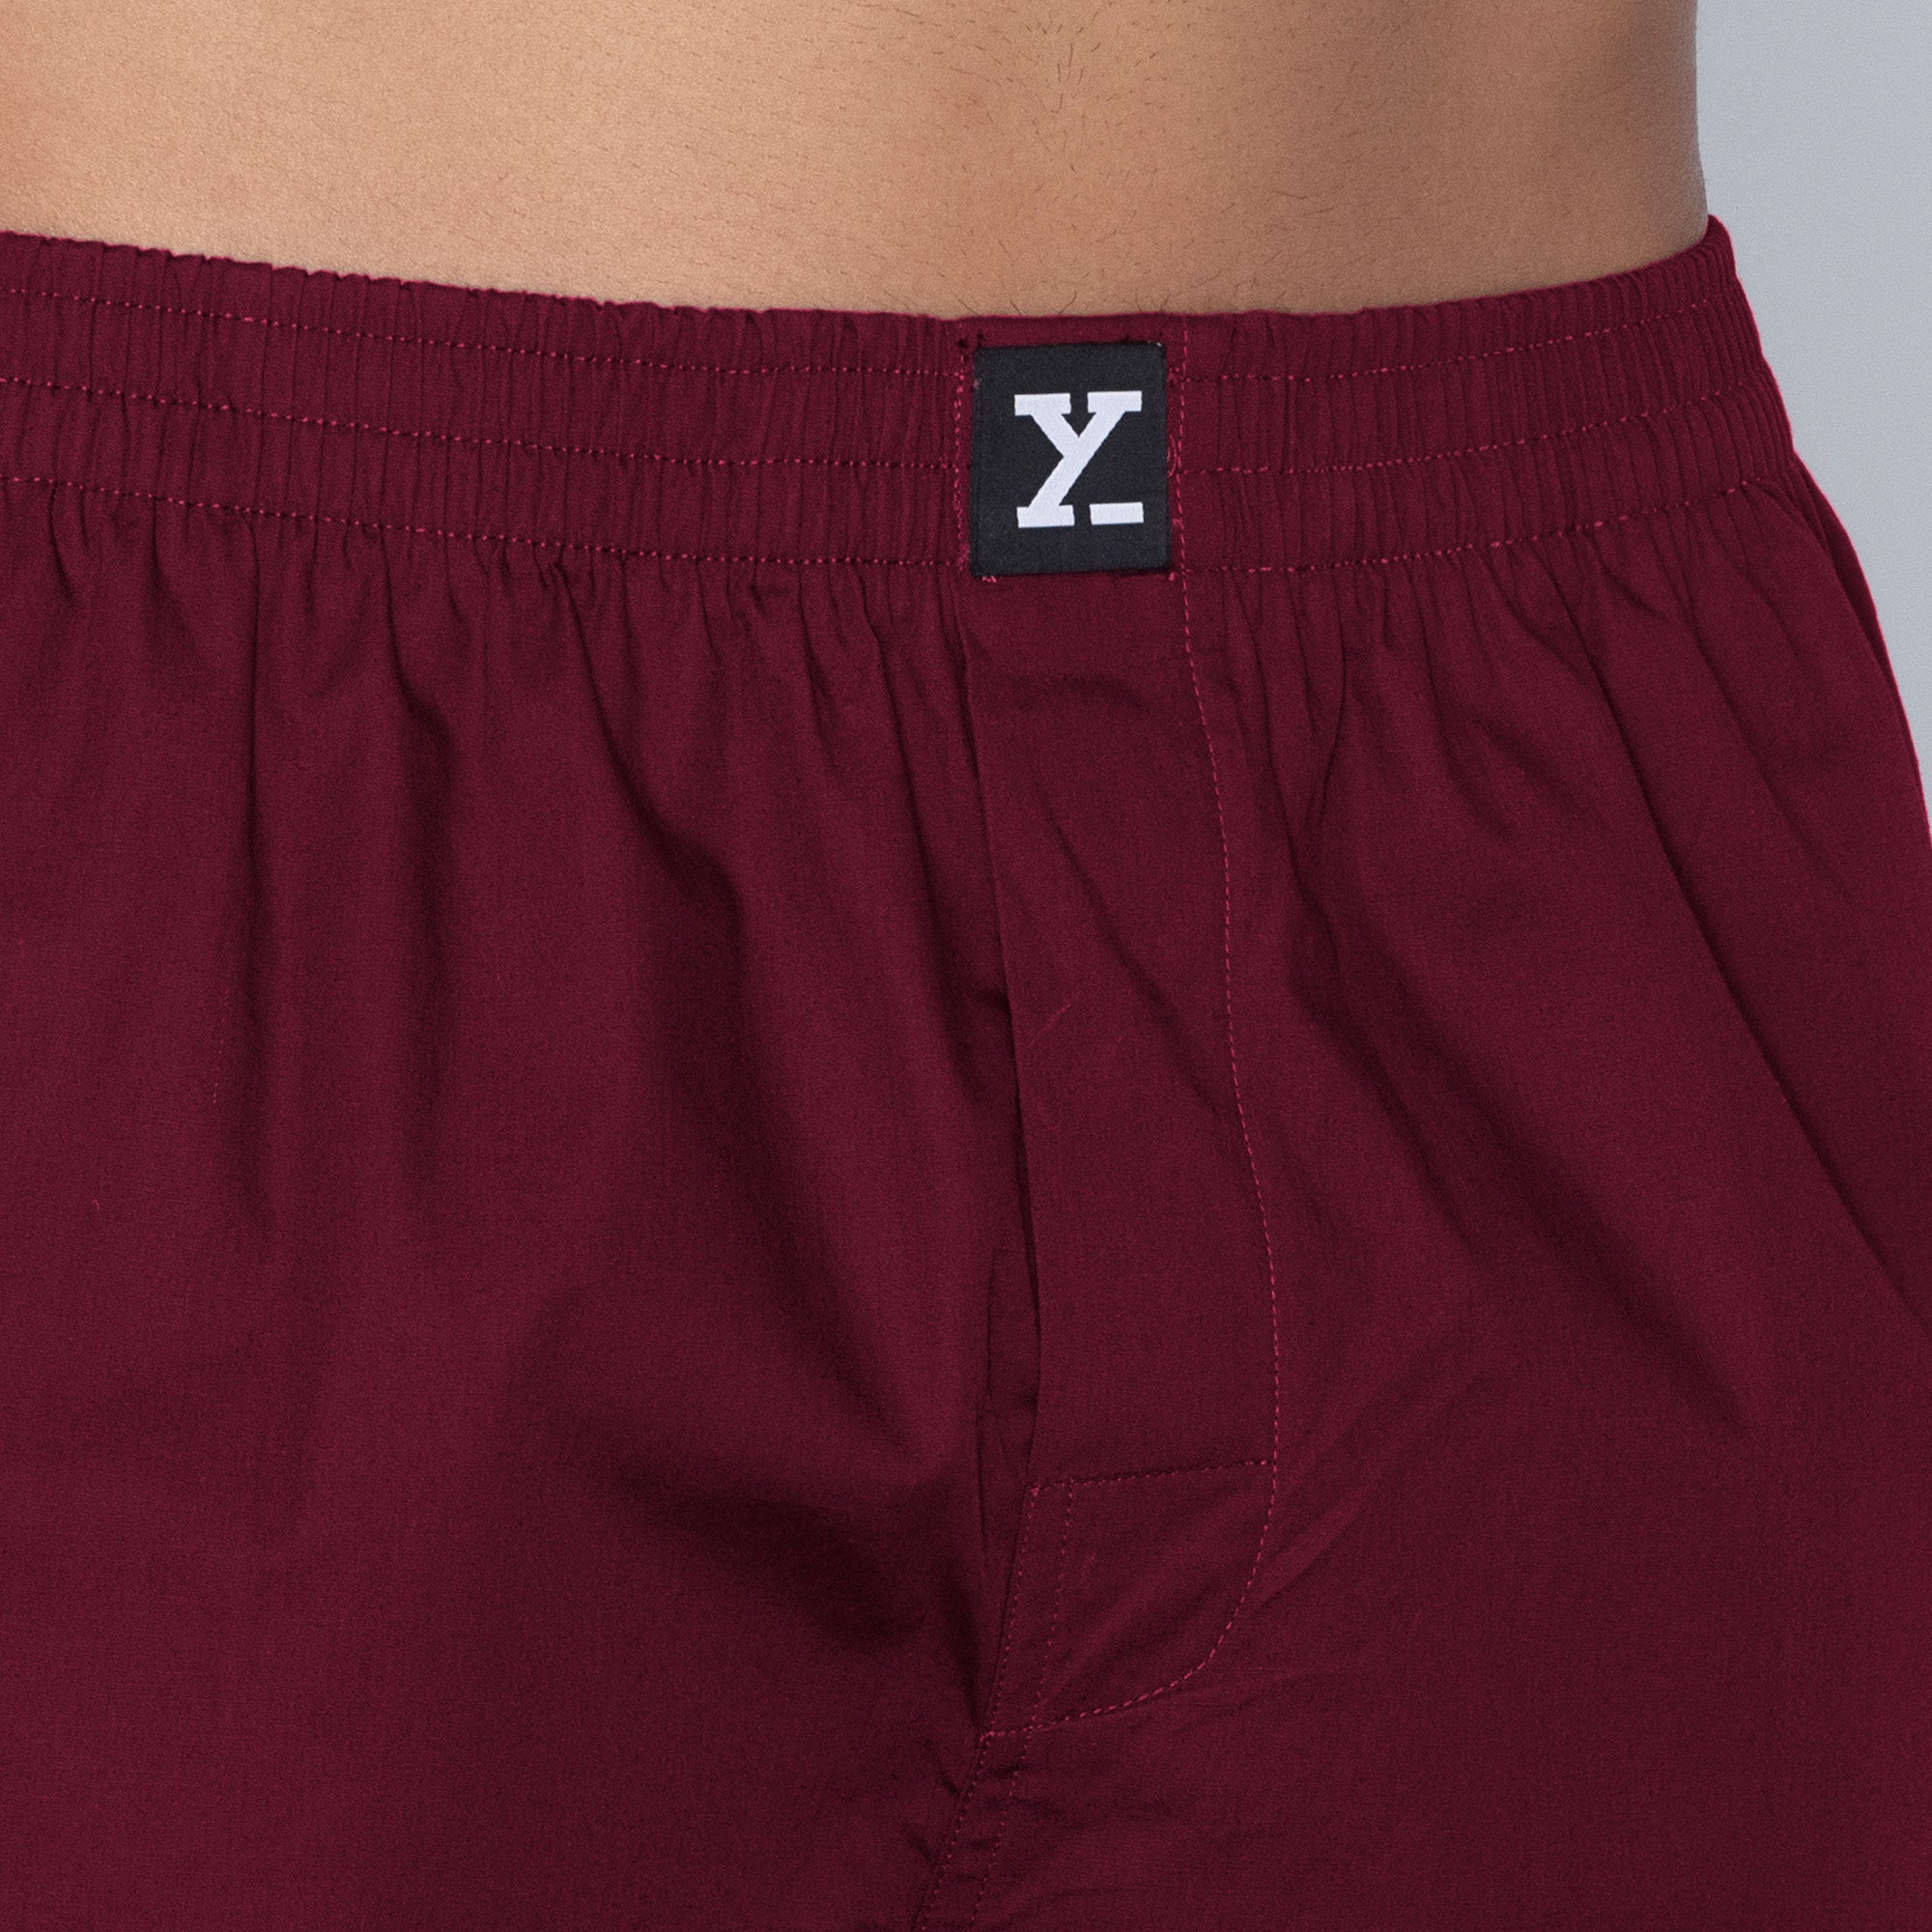 Pace Super Combed Cotton Boxer Shorts For Men Bold Burgundy - XYXX Mens Apparels